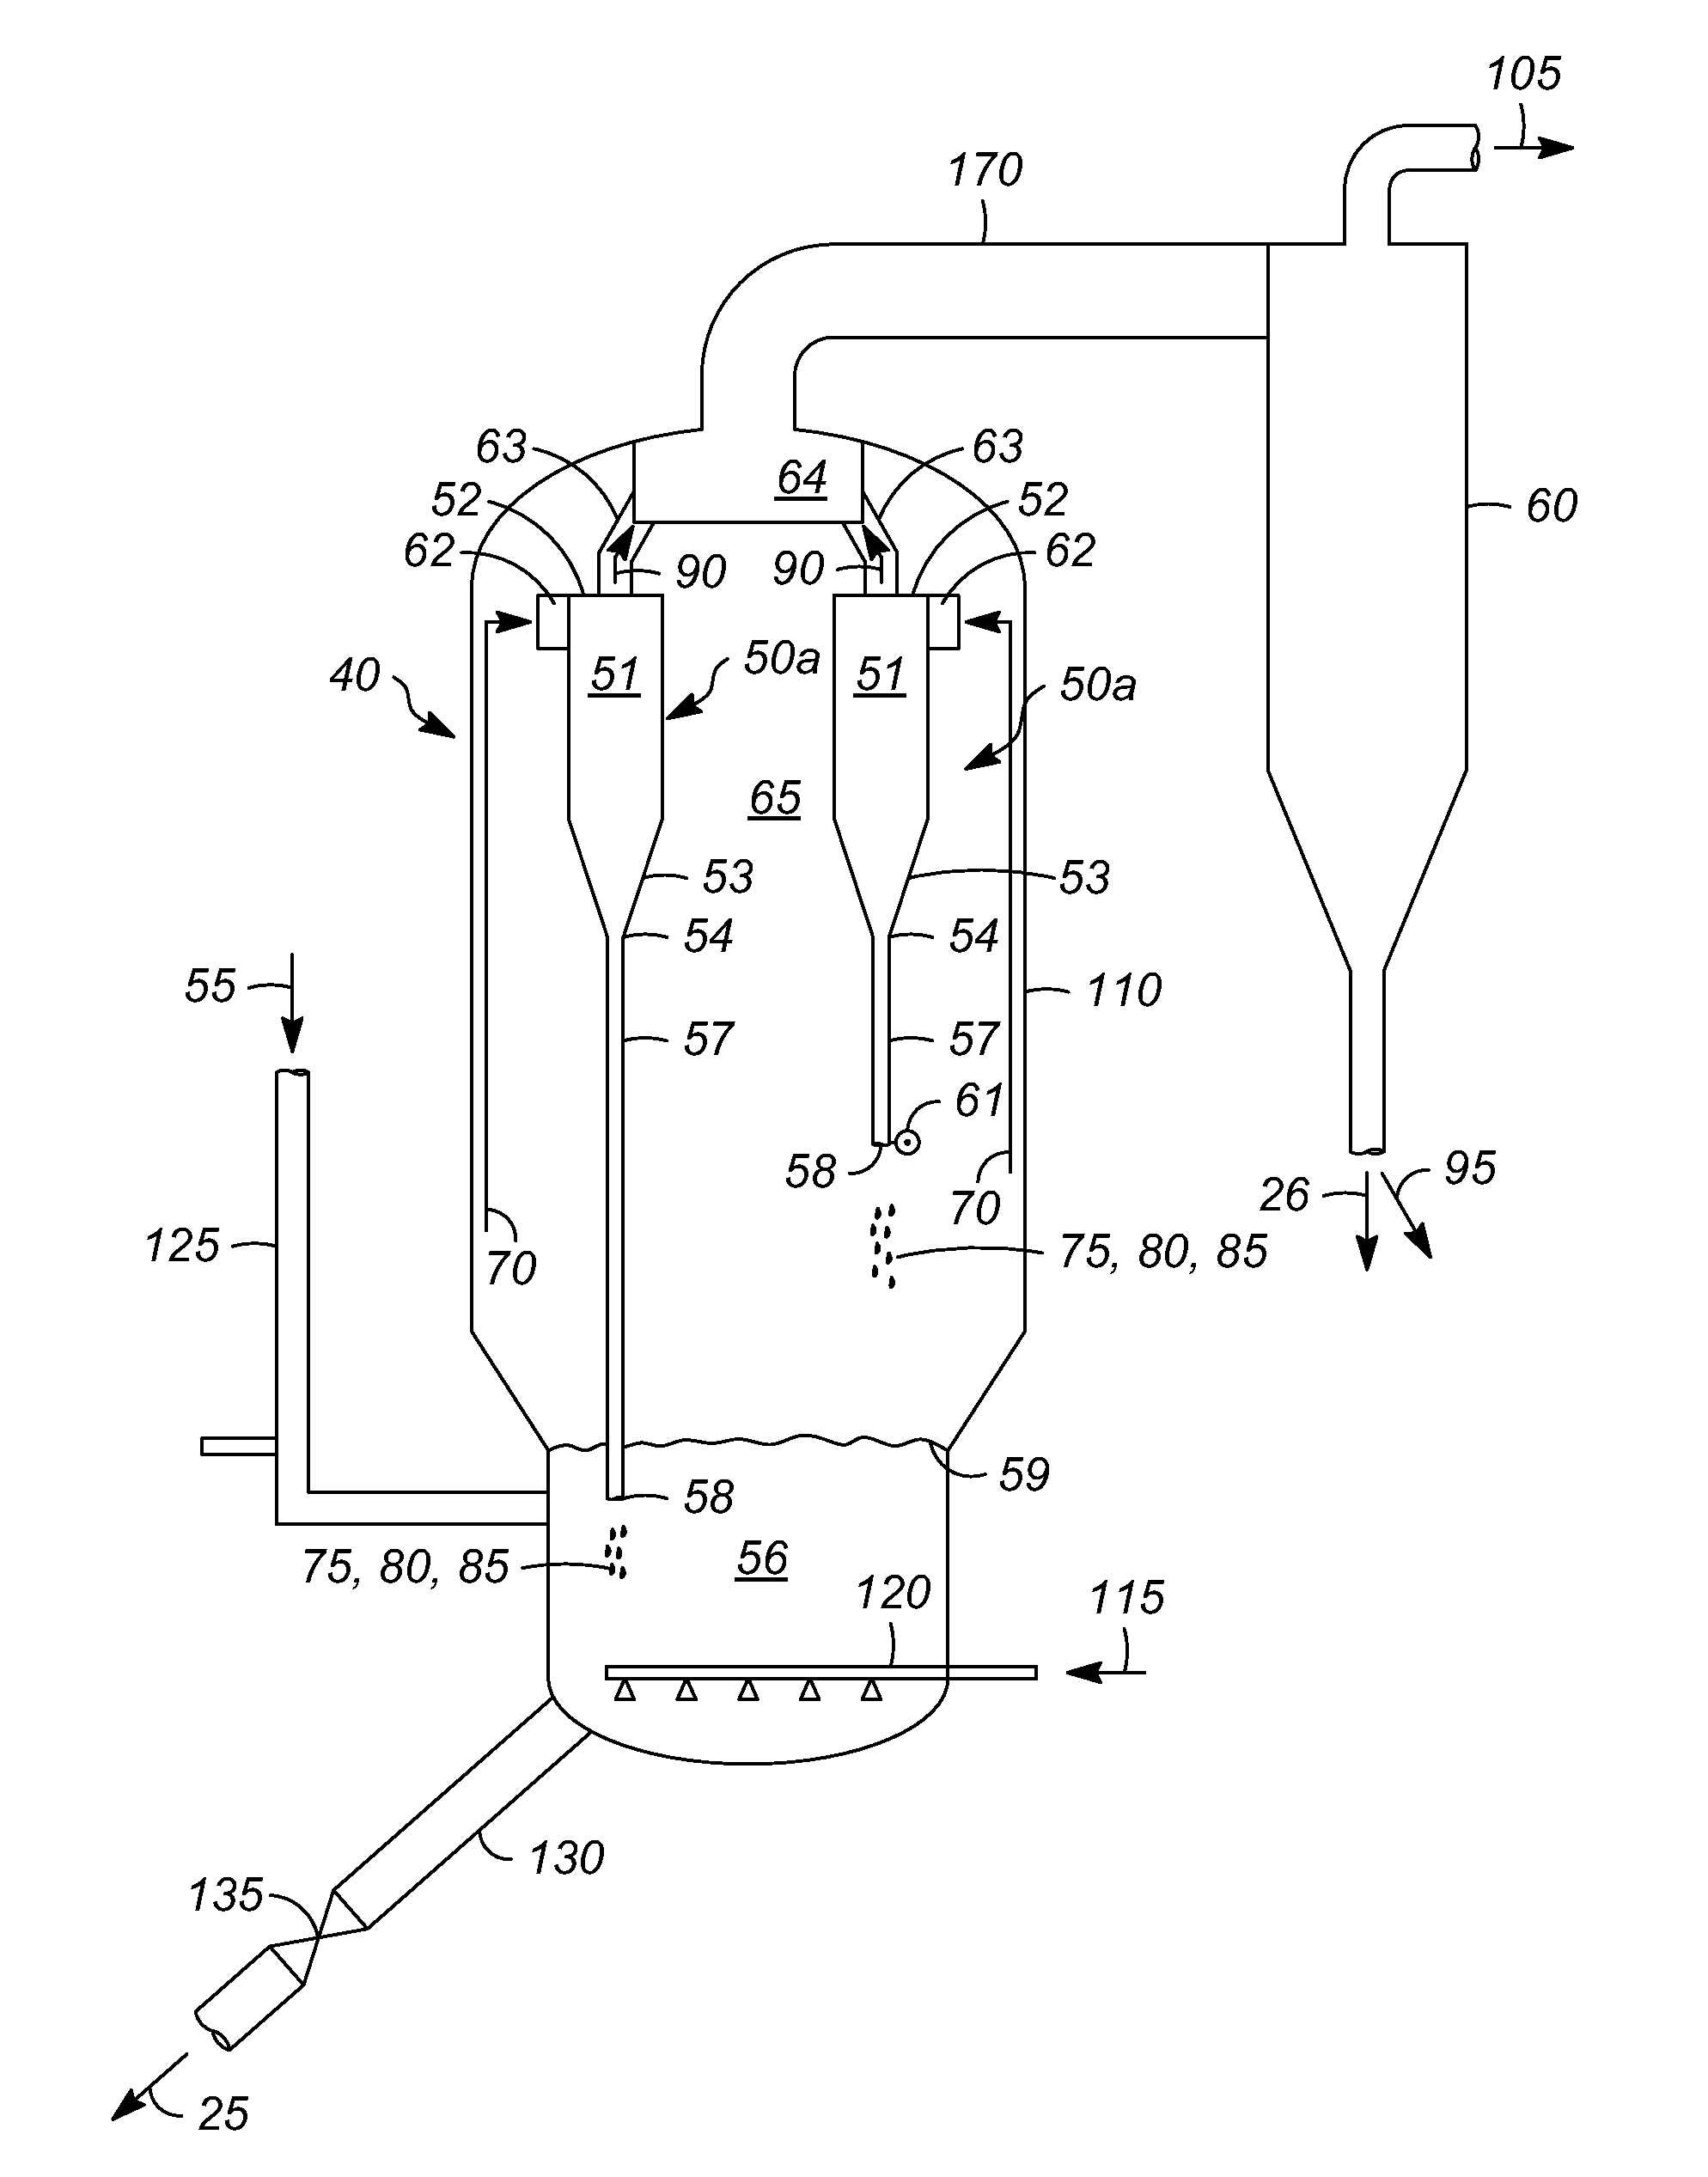 Processes for controlling afterburn in a reheater and for controlling loss of entrained solid particles in combustion product flue gas